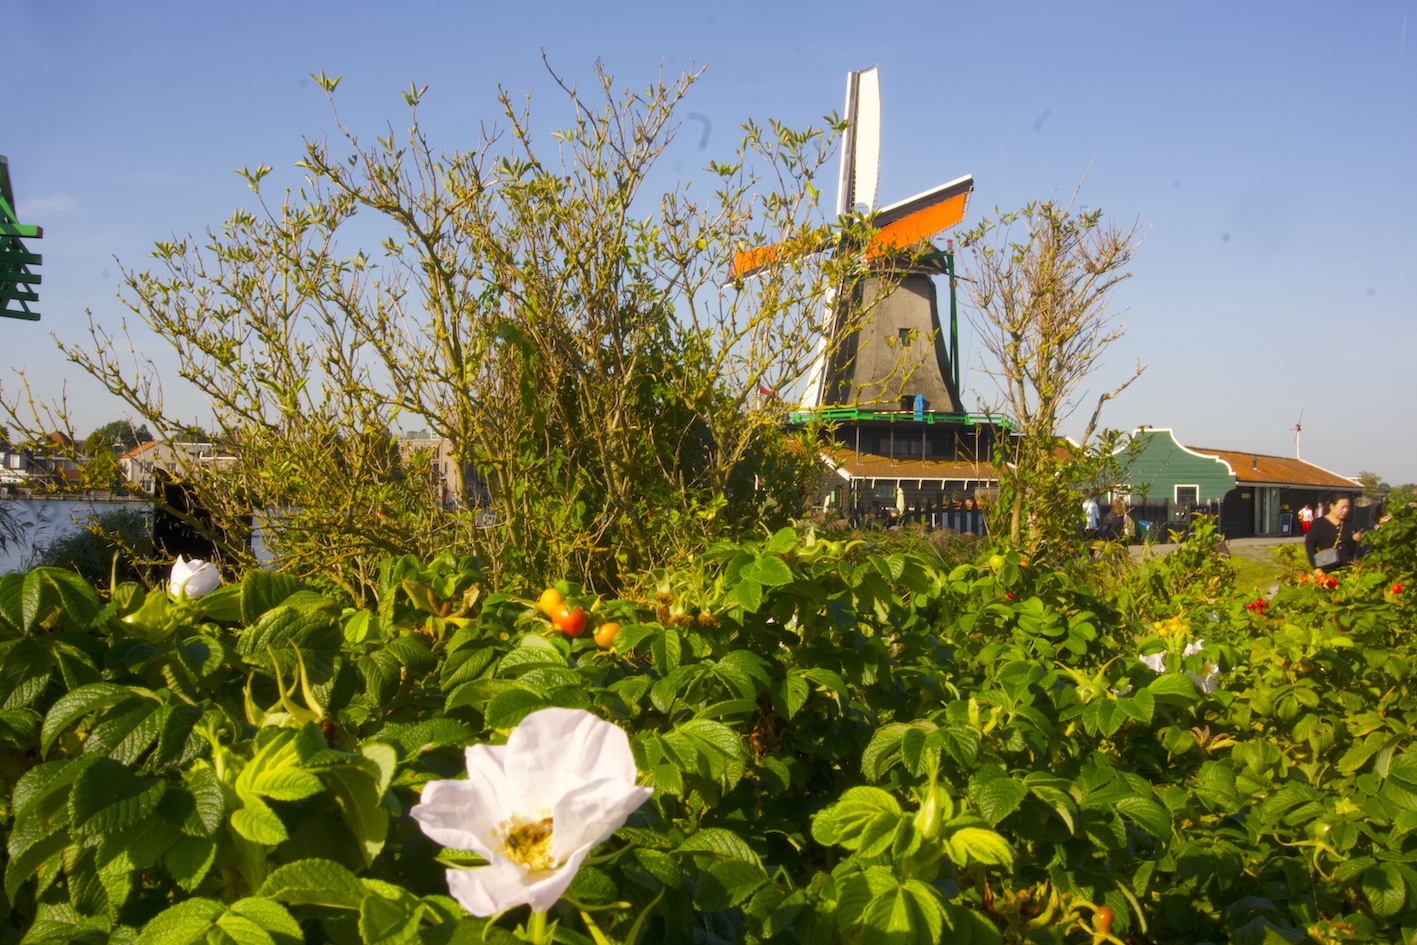 A windmill view framed by some hip rose flowers and fruits at the Zaanse Schans